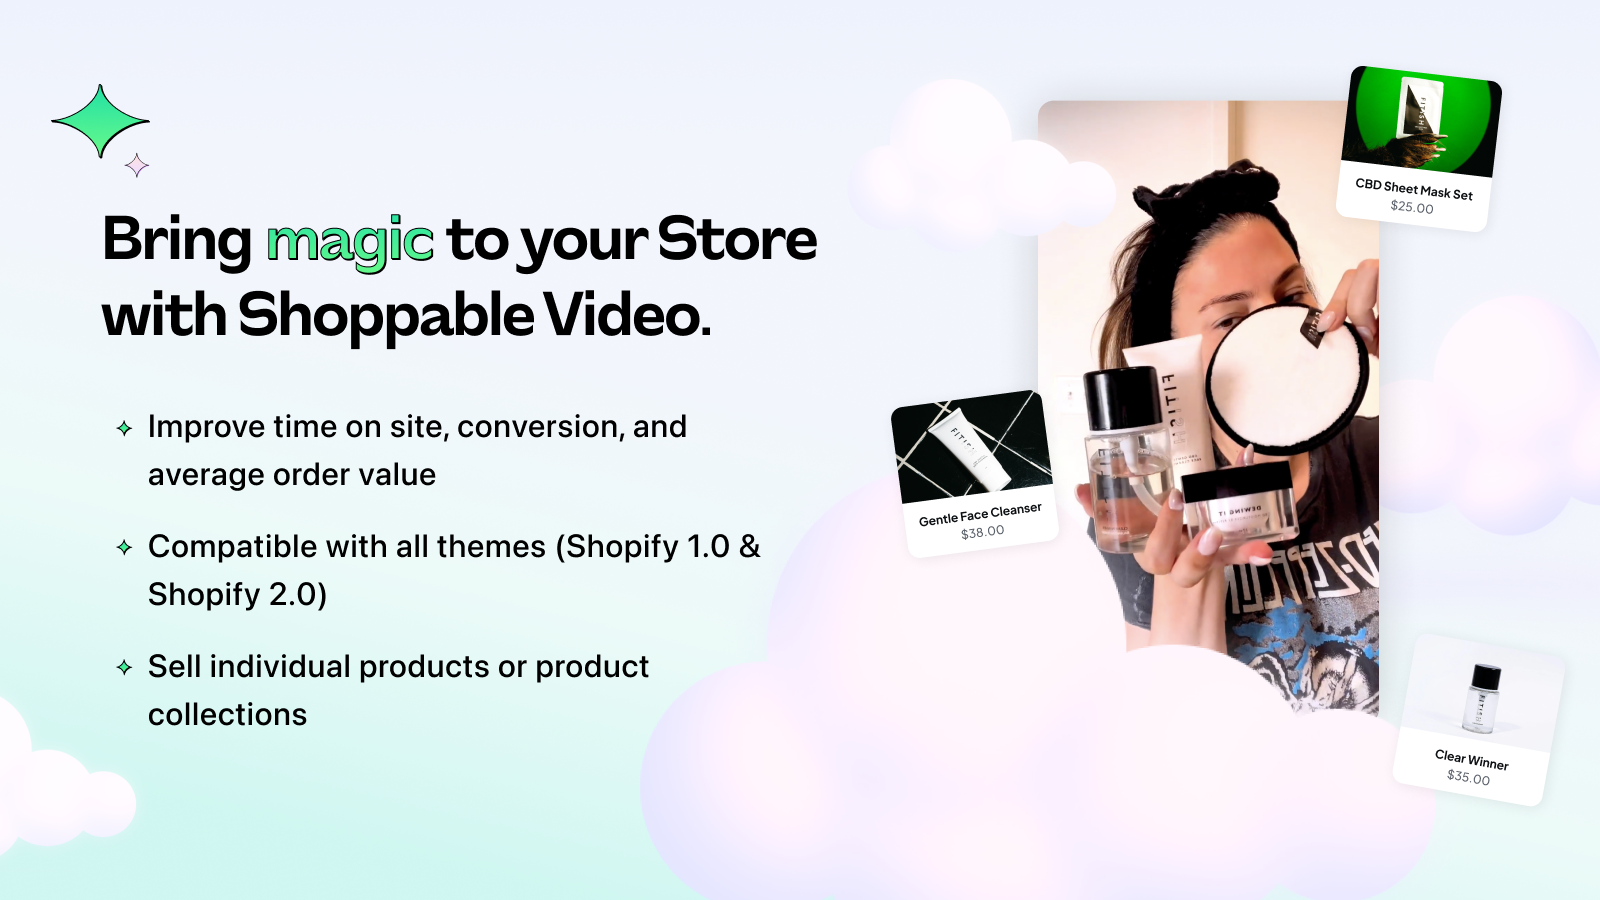 Increase conversion with shoppable video on your website